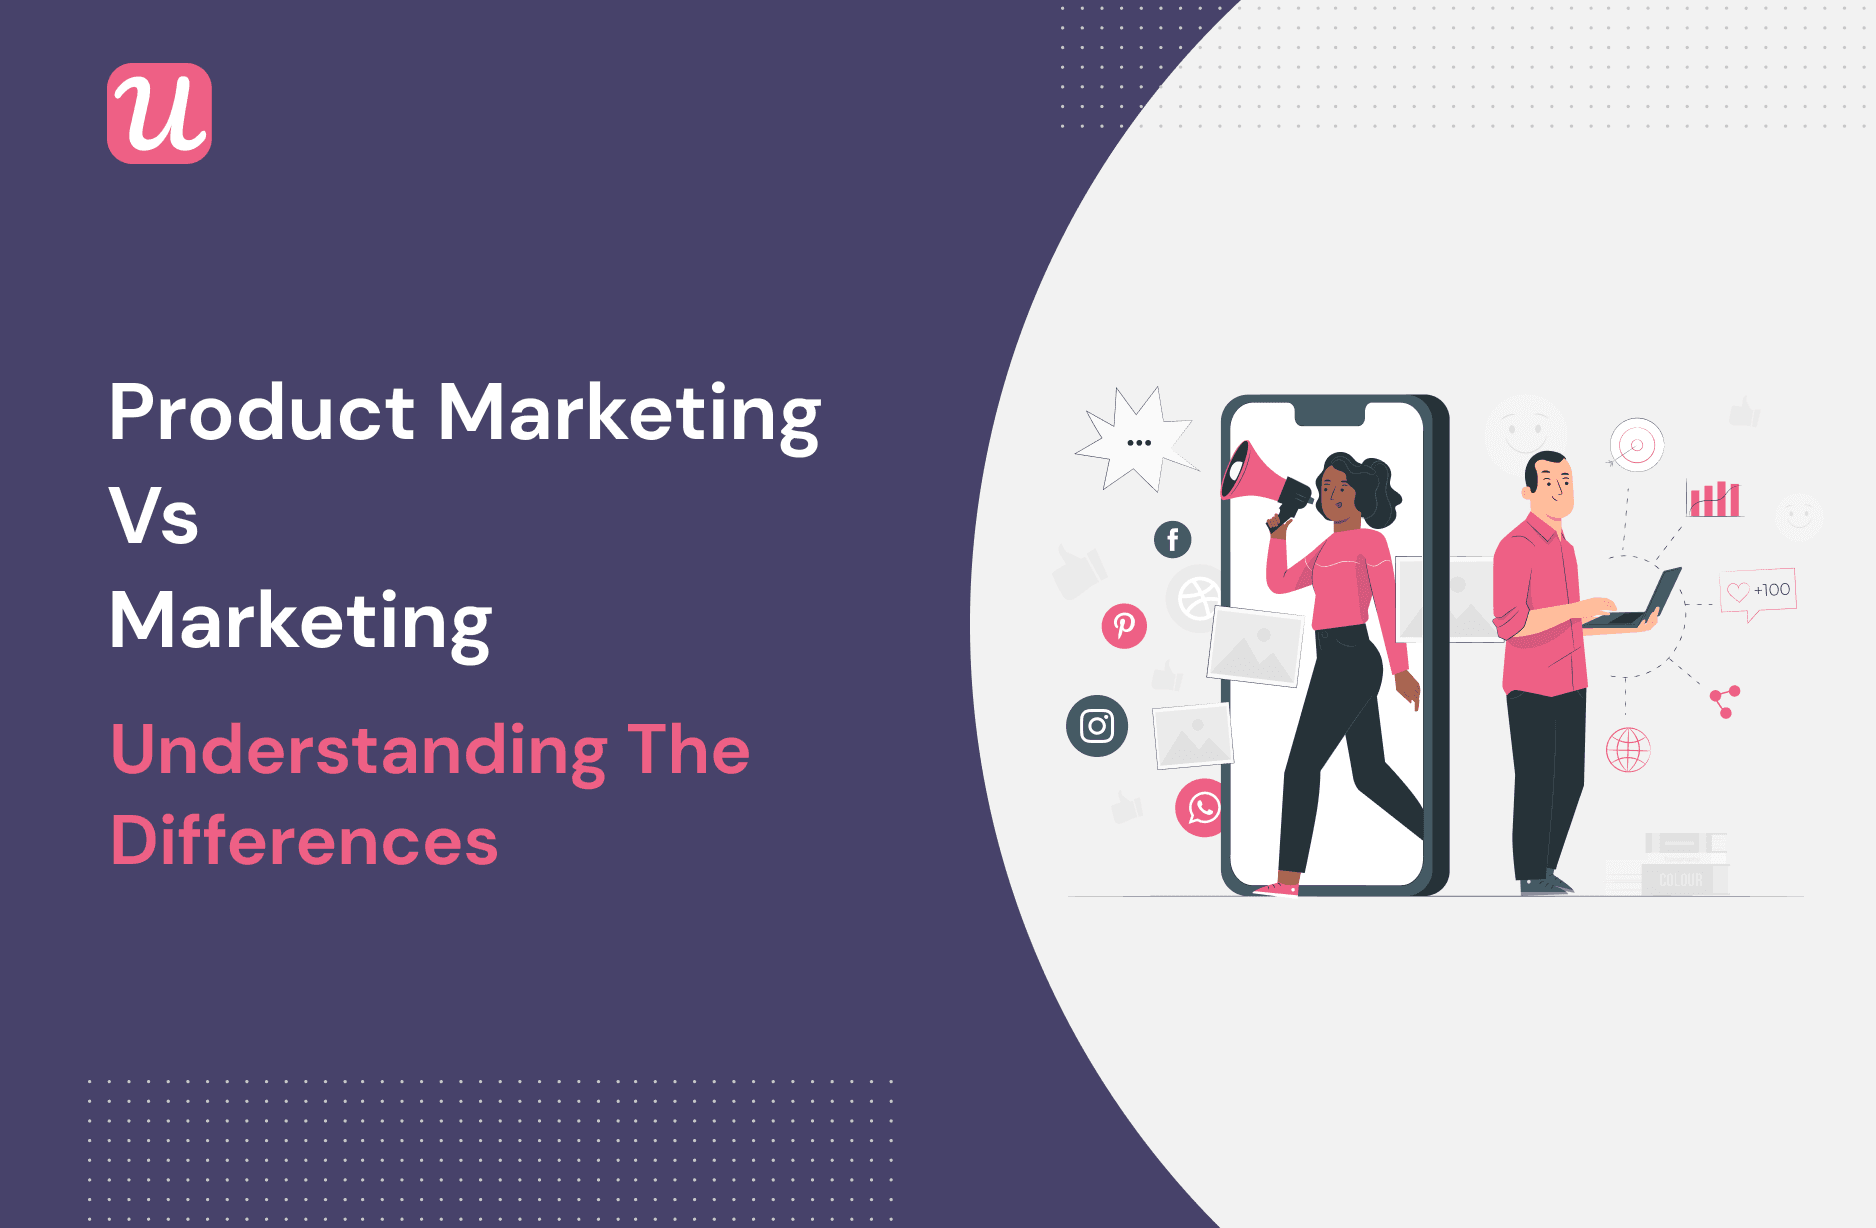 Product Marketing vs Marketing: Understanding the Differences